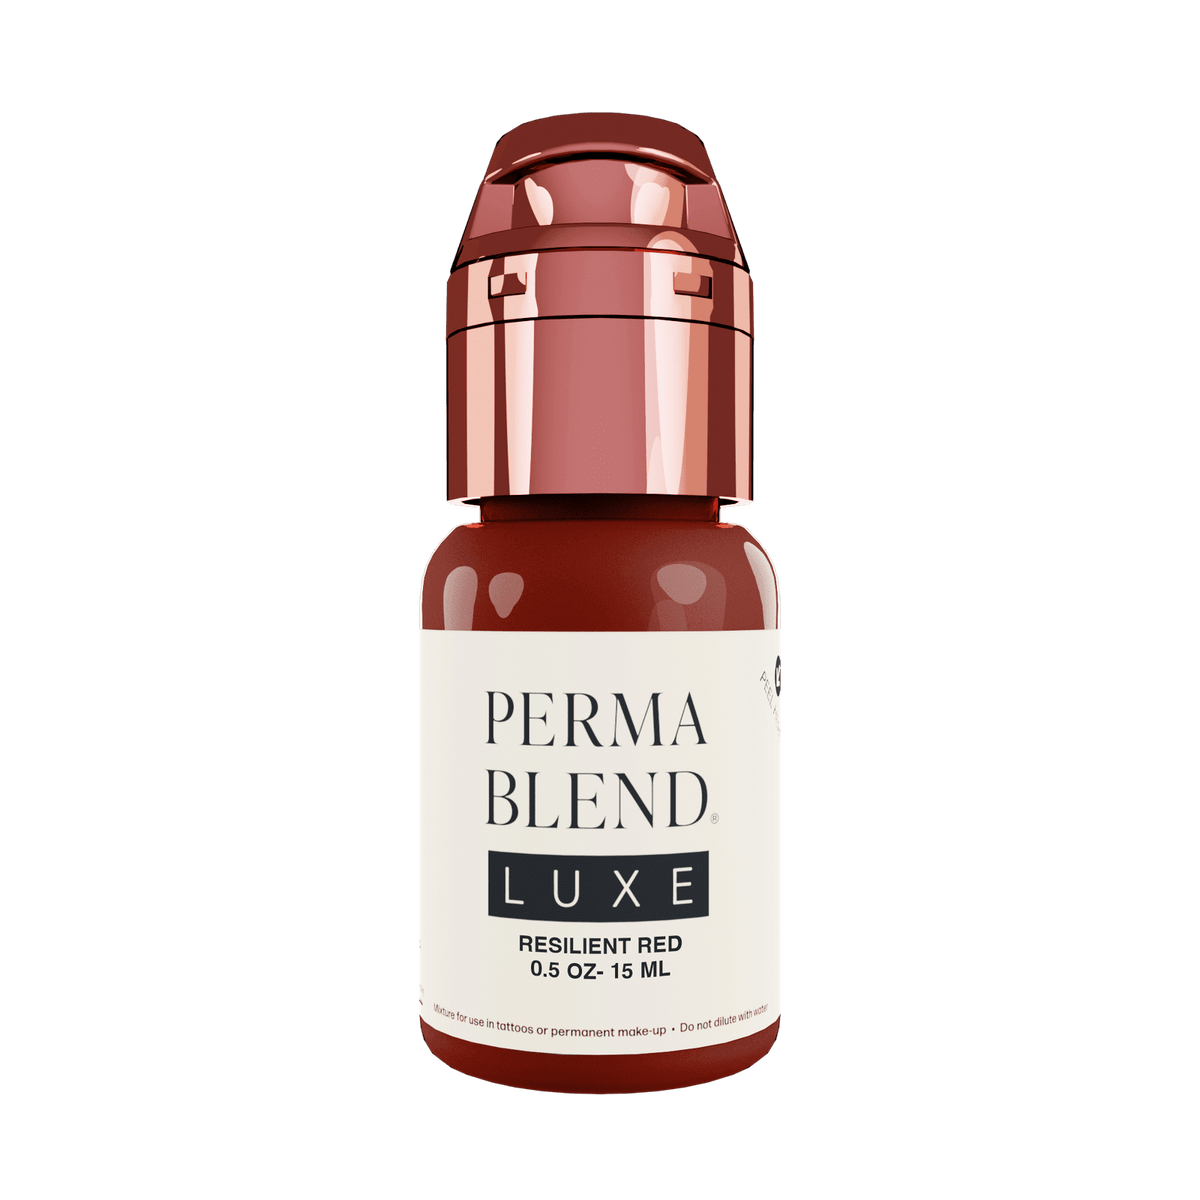 Perma Blend Luxe Resilient Red Pigmento PMU 15ml